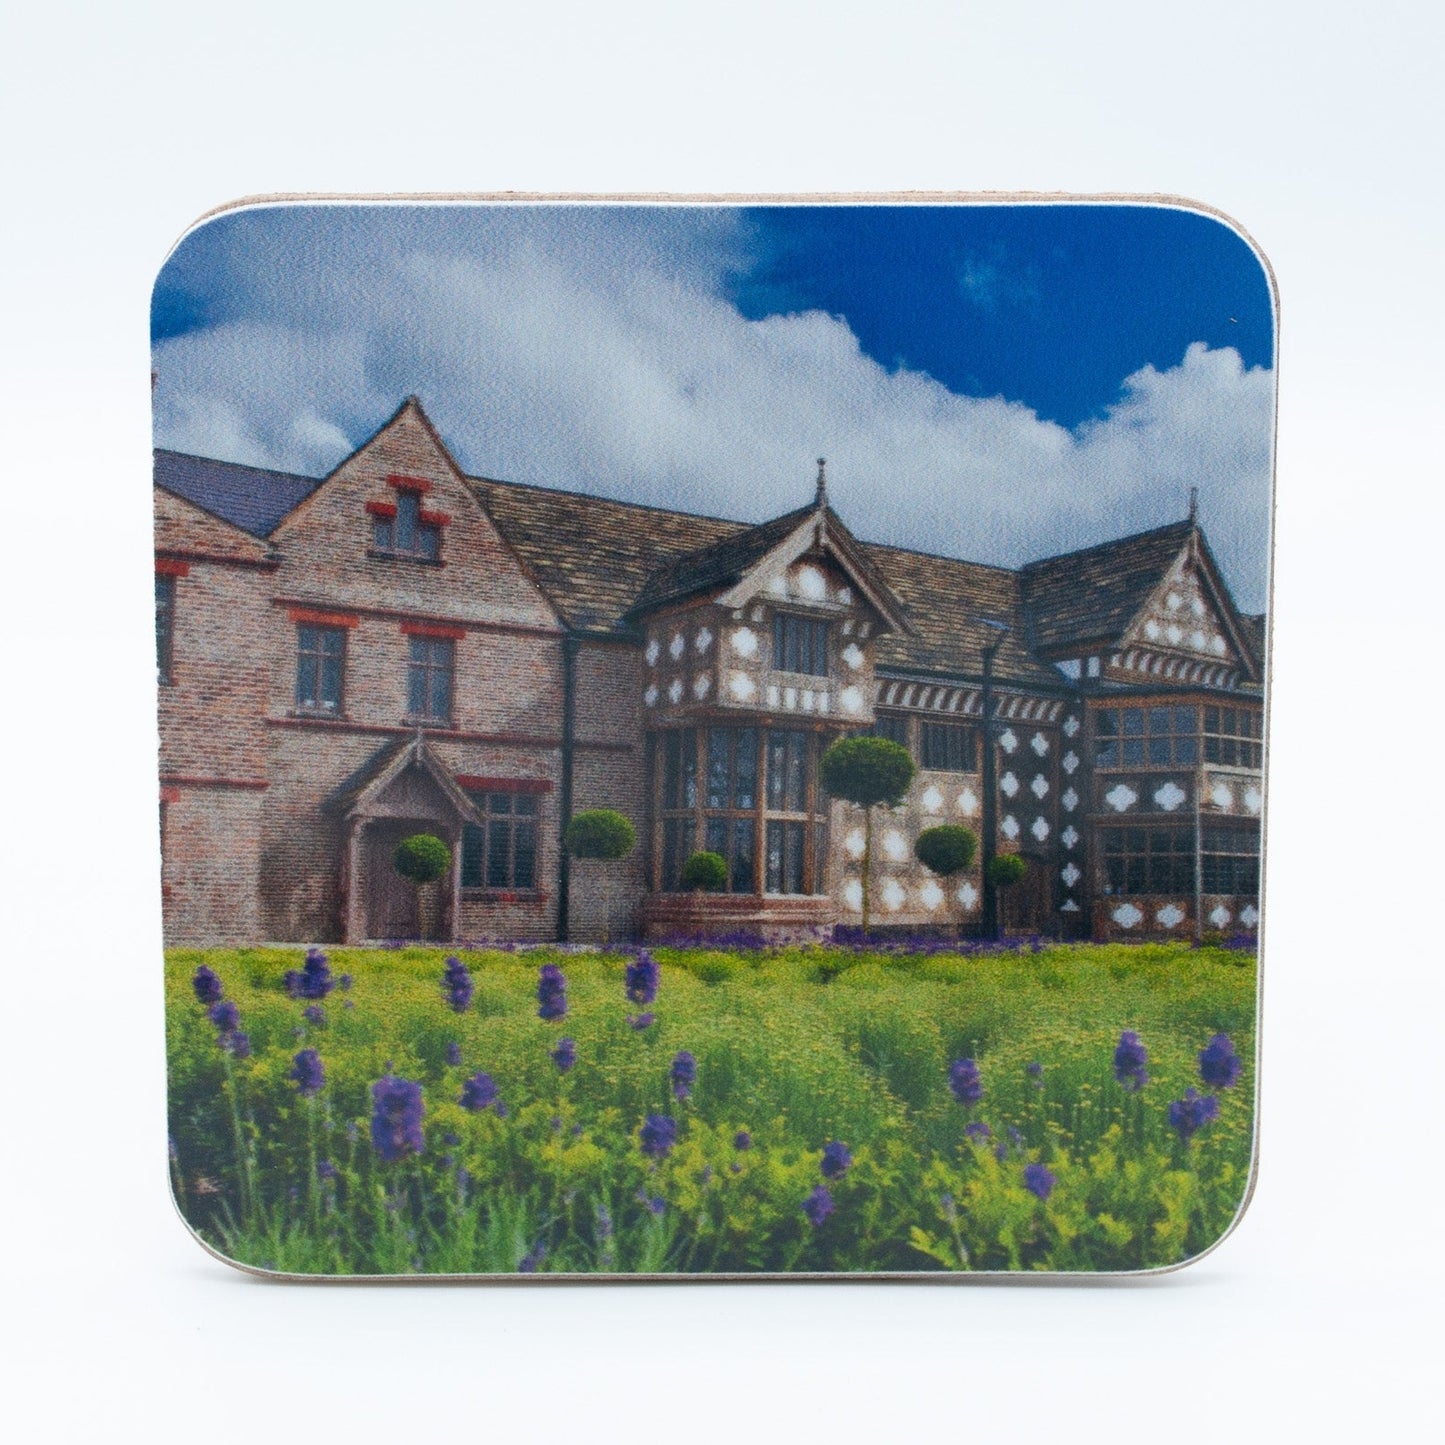 Ordsall Hall Frontage Photograph Drinks Coaster